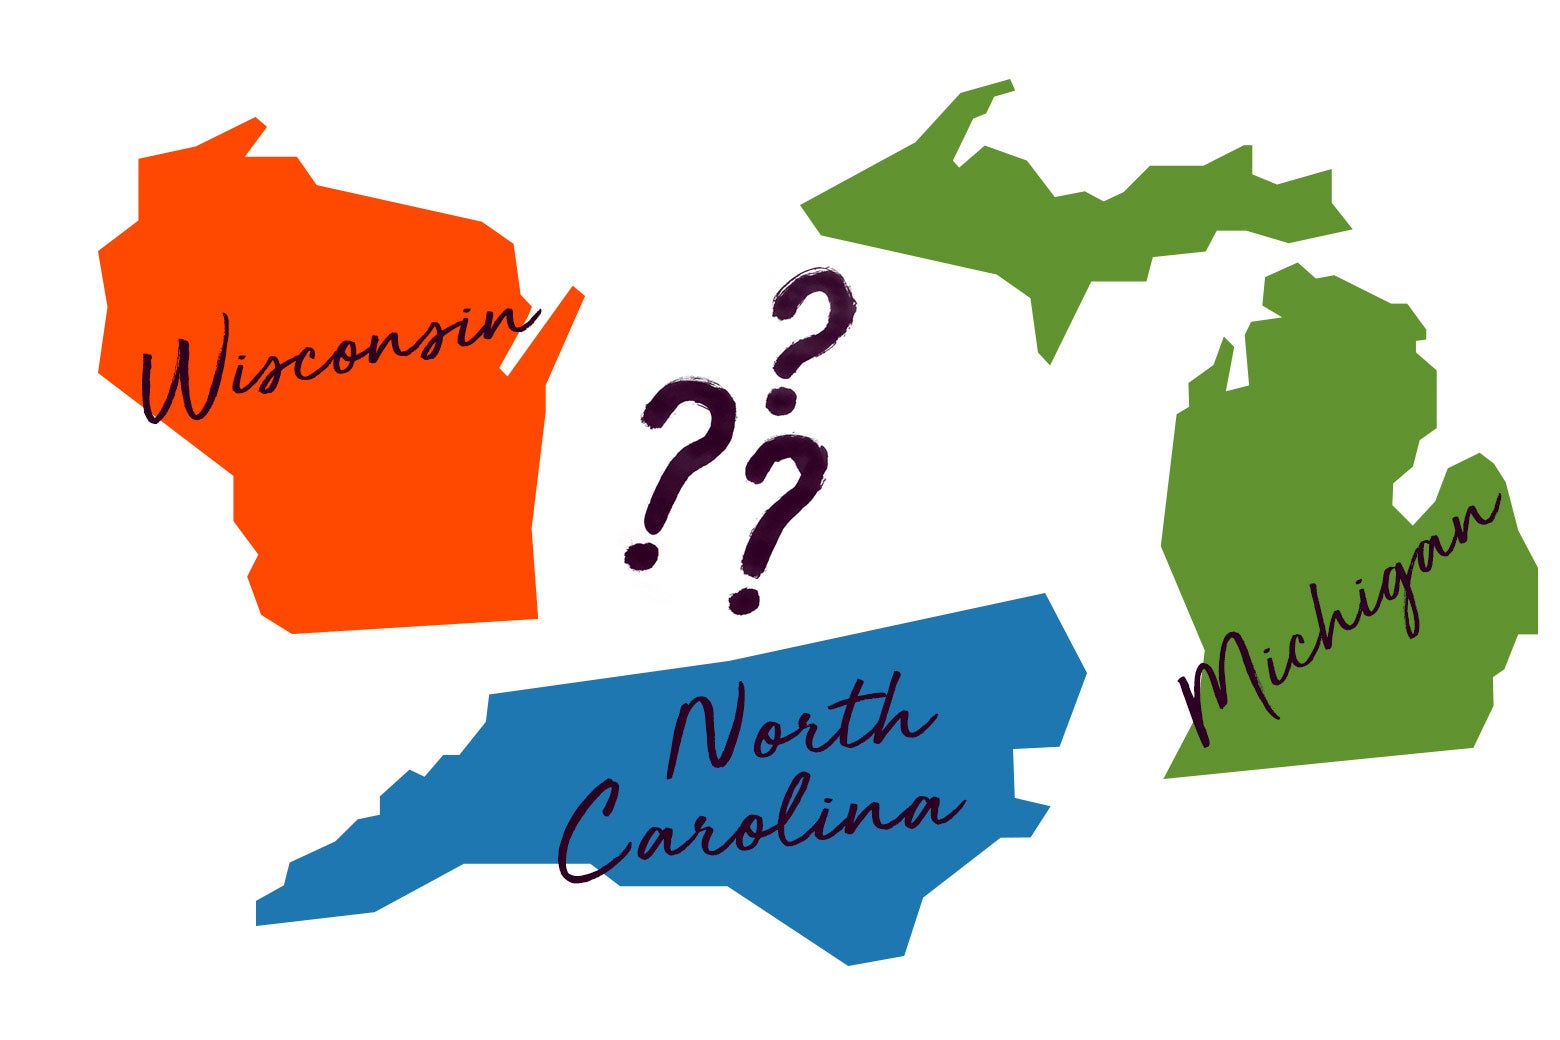 Illustration: Colorful images of Wisconsin, Michigan, and North Carolina with several question marks between them.